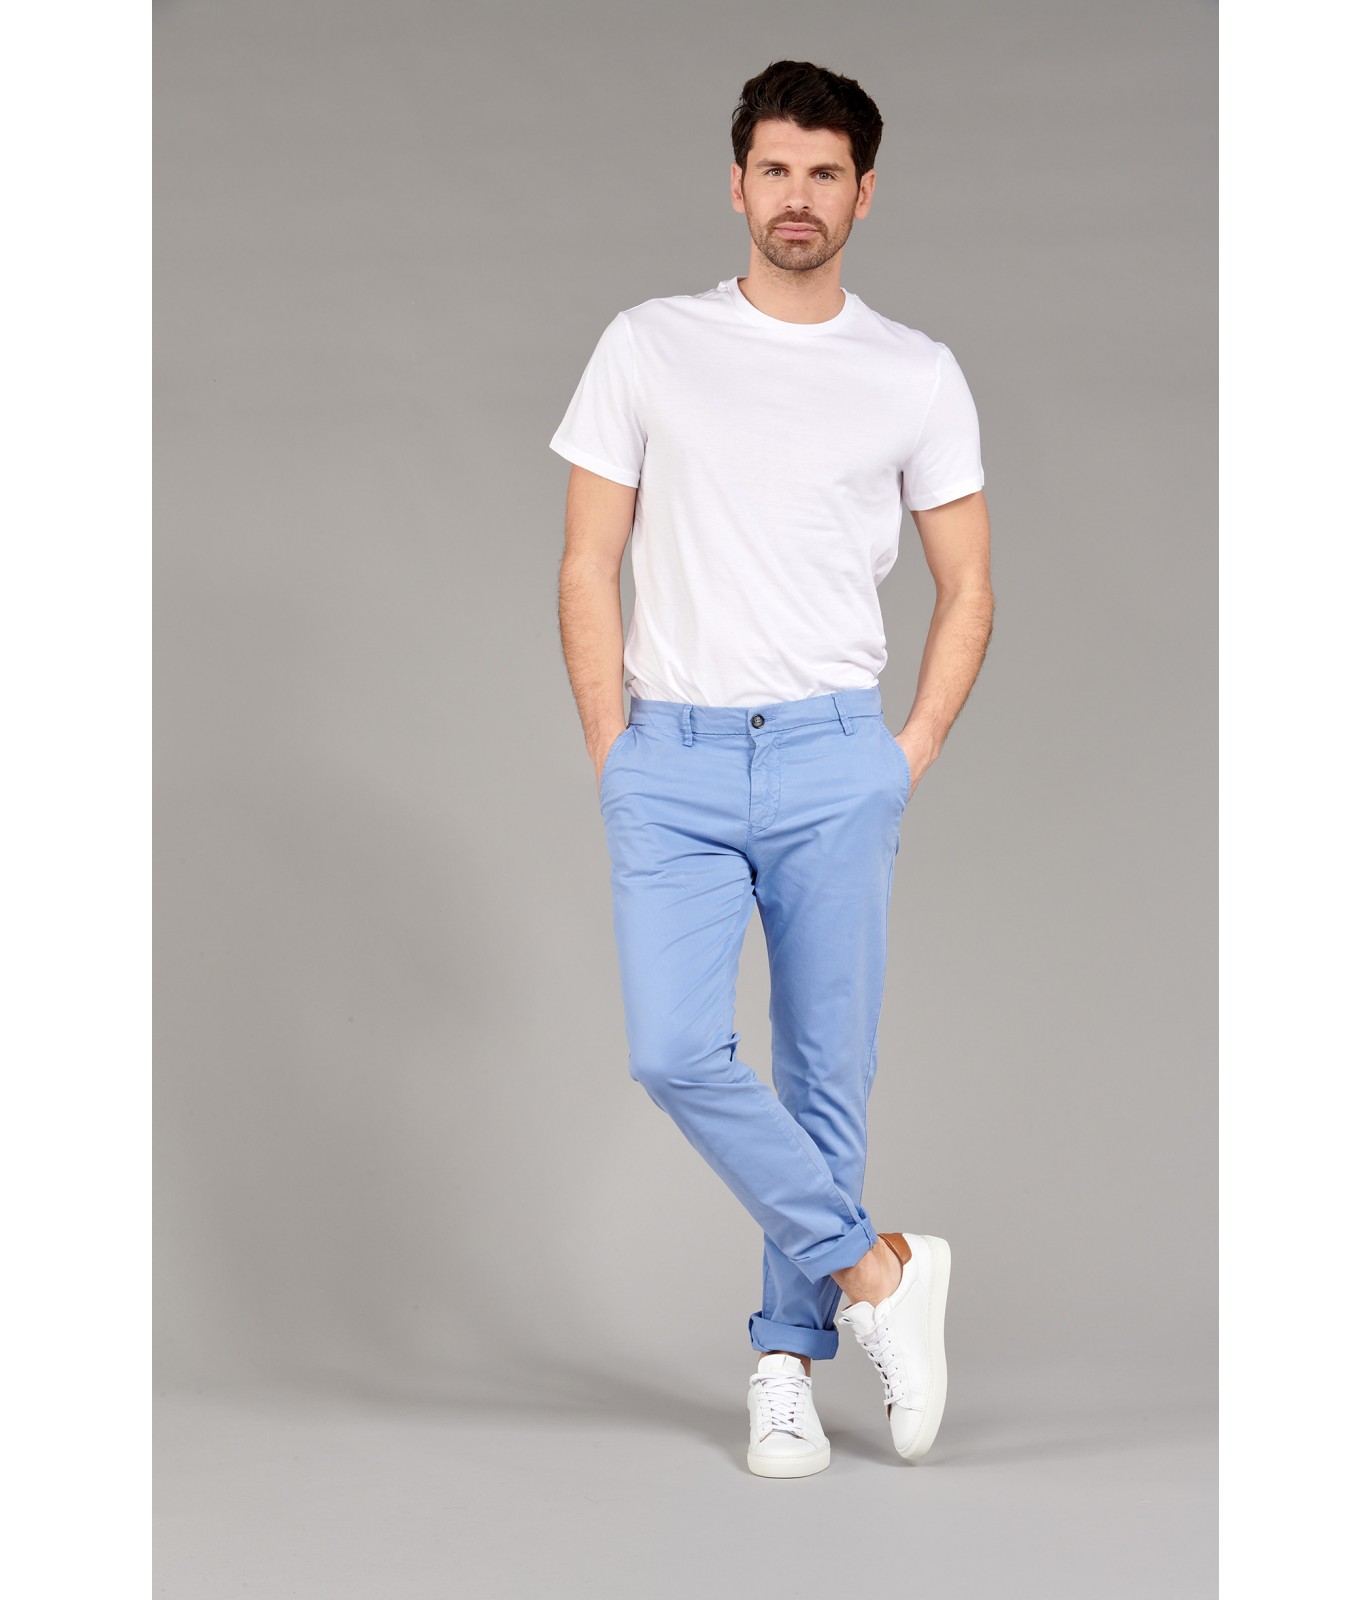 52 Best Chinos And Shirt Combinations For Men  Fashion Hombre